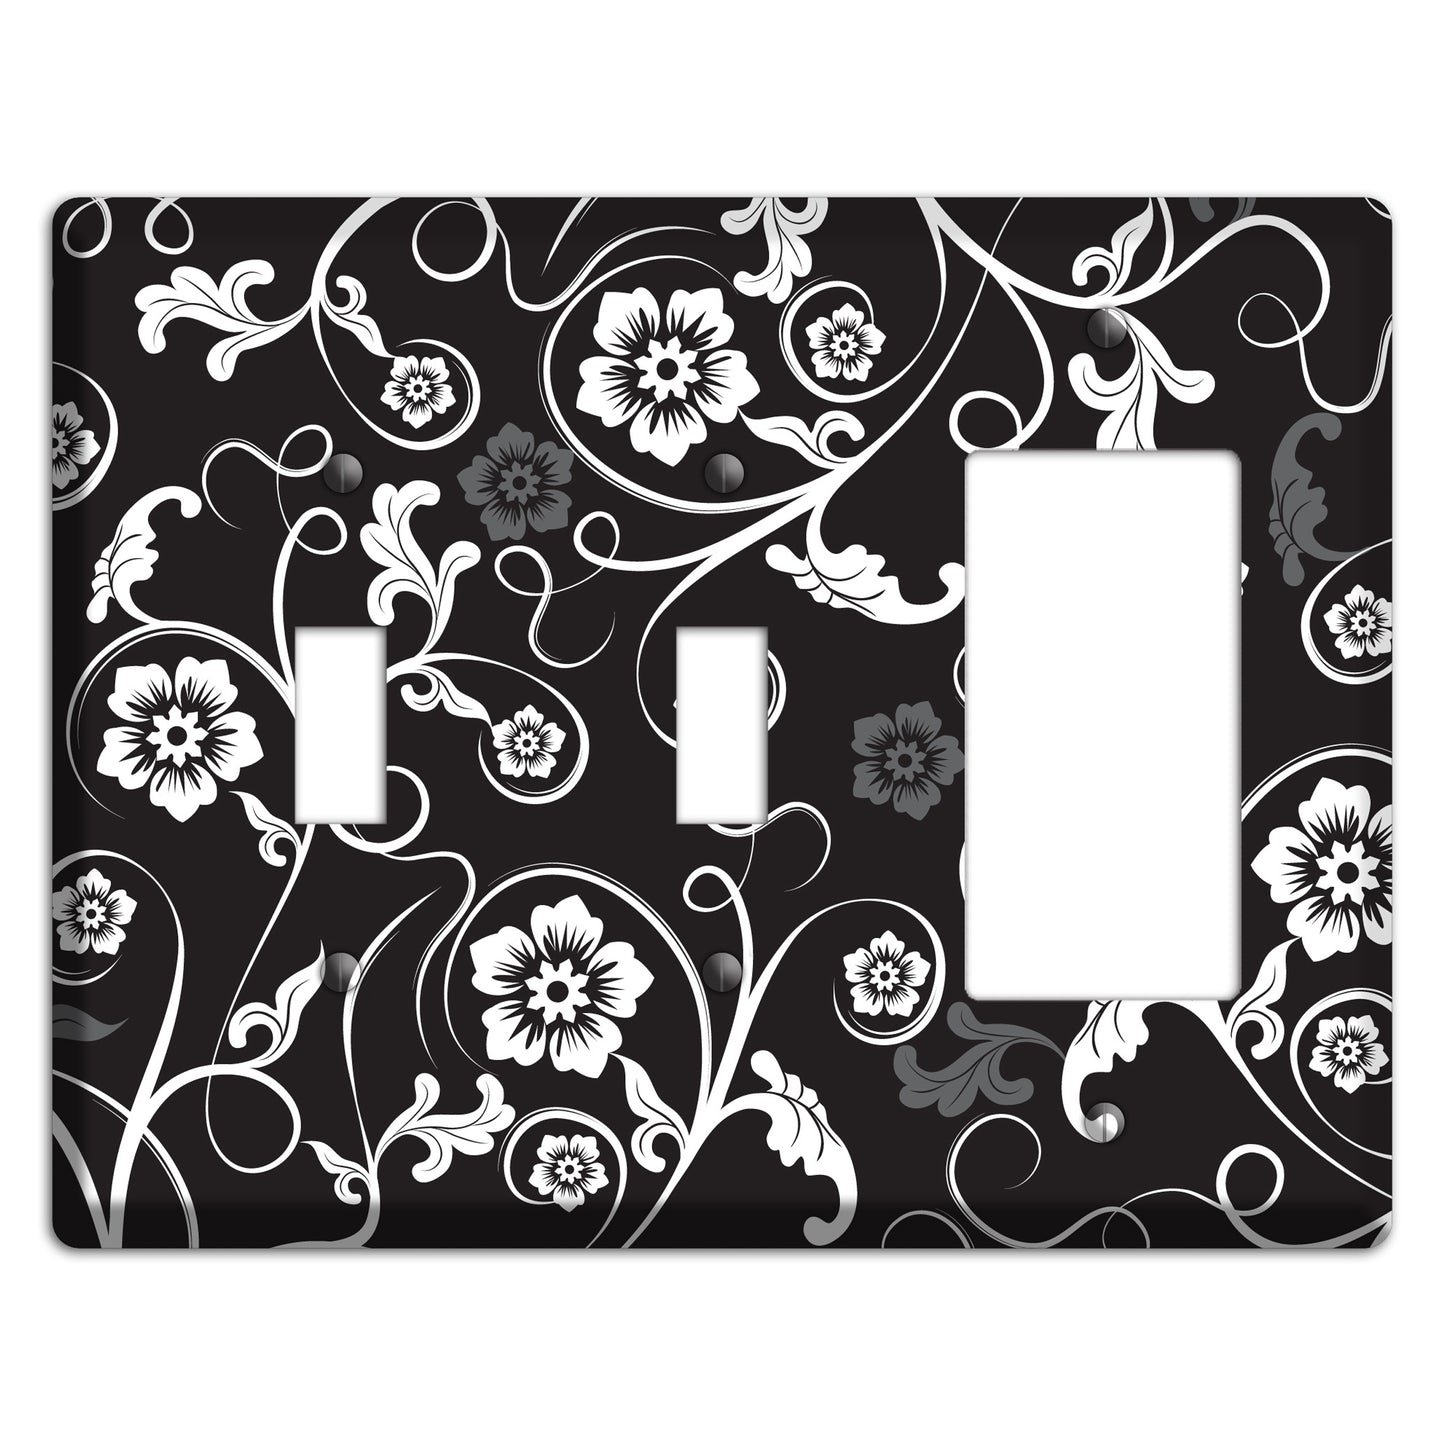 Black with White Flower Sprig 2 Toggle / Rocker Wallplate